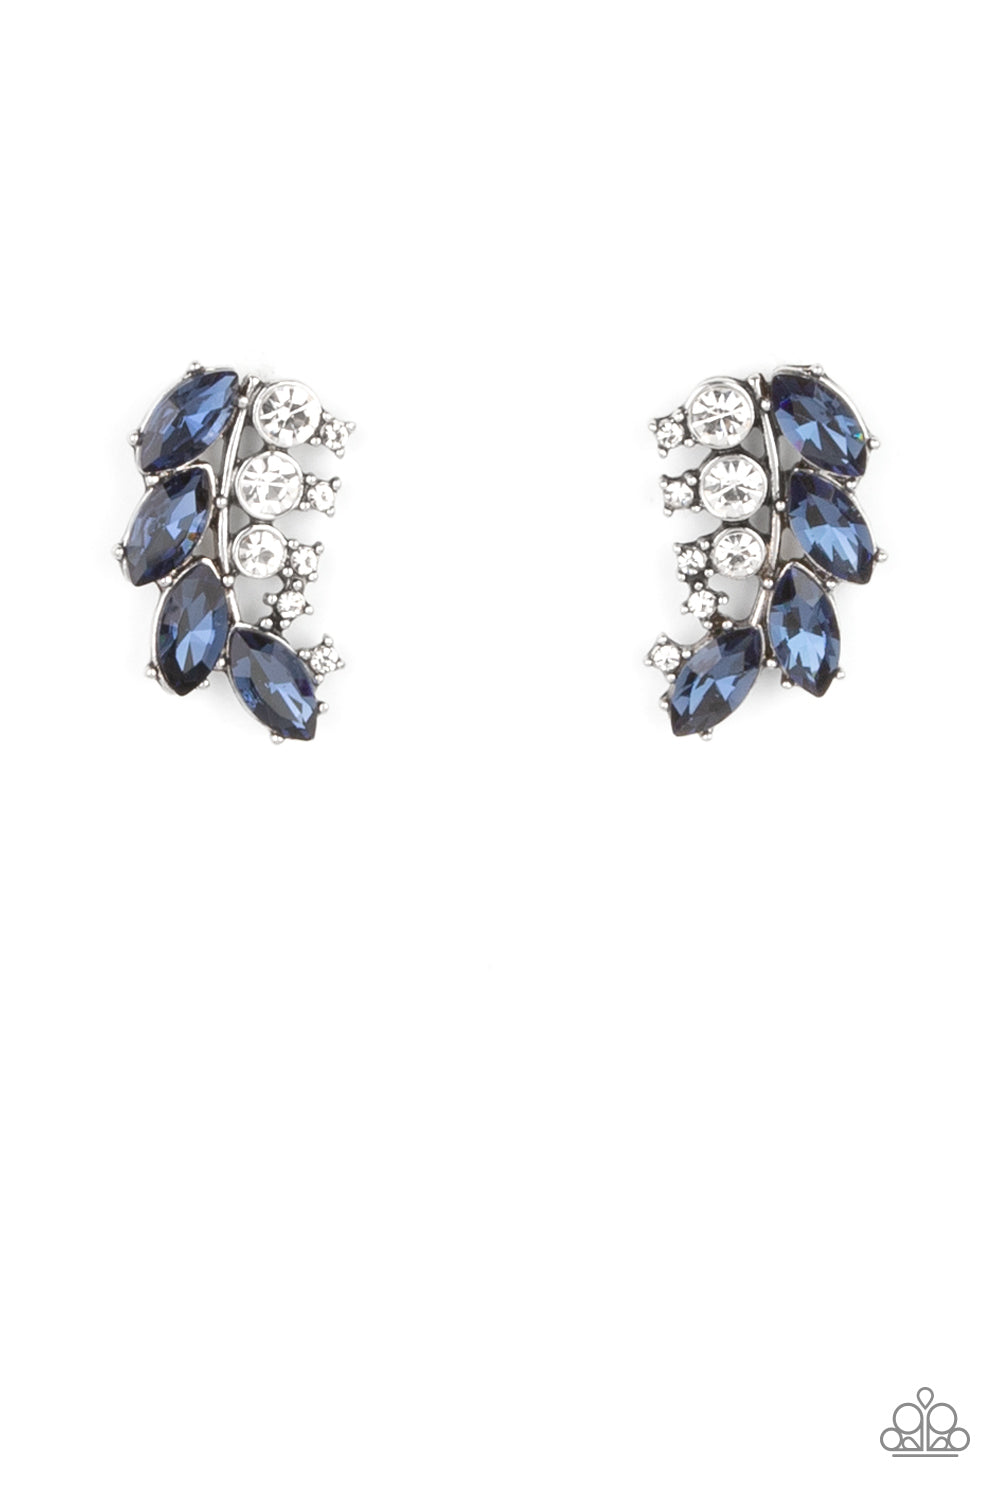 Flawless Fronds - Blue Rhinestone Post Earrings - Paparazzi Accessories a frond of dazzling blue marquise and round white rhinestones delicately curves below the ear for a flawless finish. Earring attaches to a standard post fitting.  Sold as one pair of post earrings.